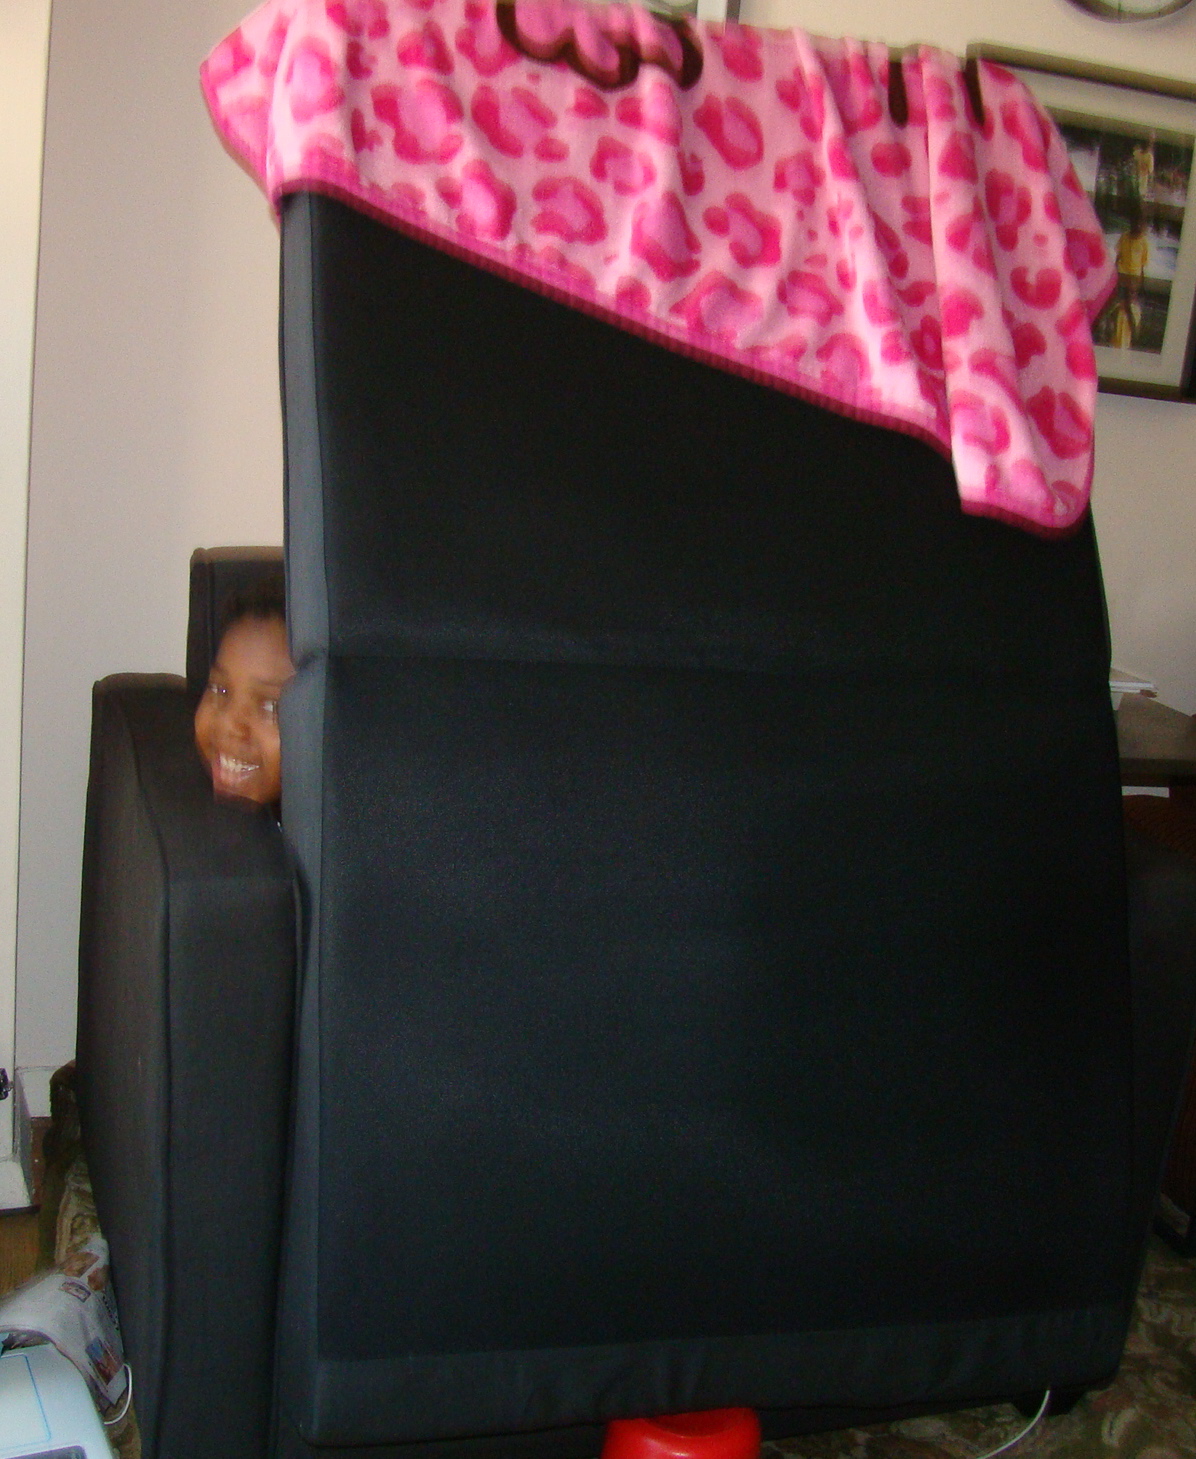 The Chair as a Fort